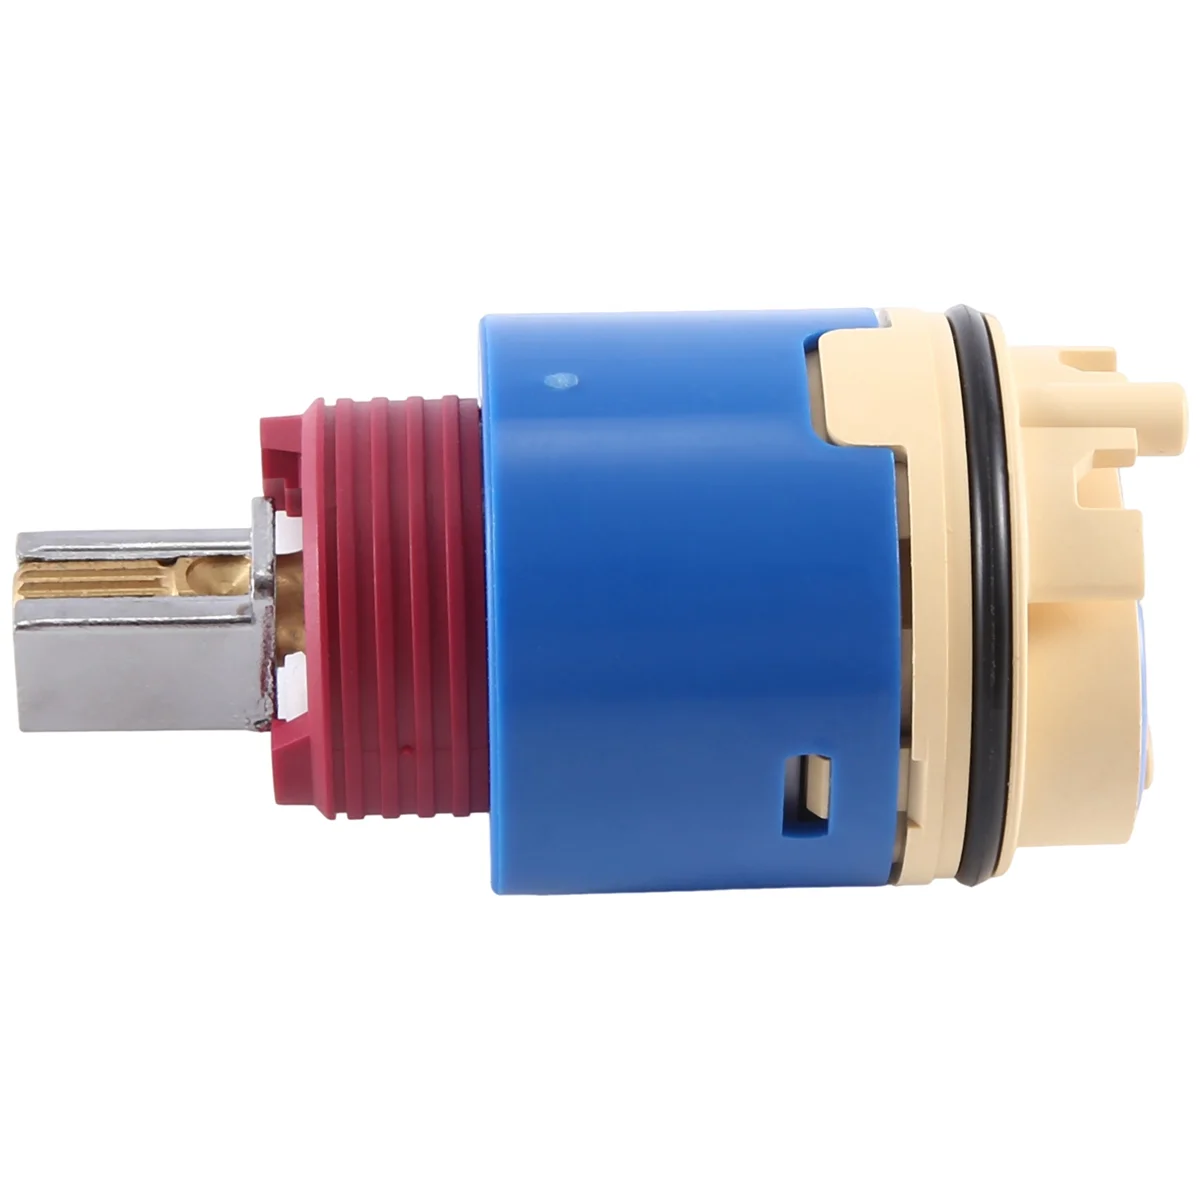 

Pressure Balancing Cartridge Replacement for RK7300-CART-3P, Faucet Cartridge Replacement Compatible with Z-7300